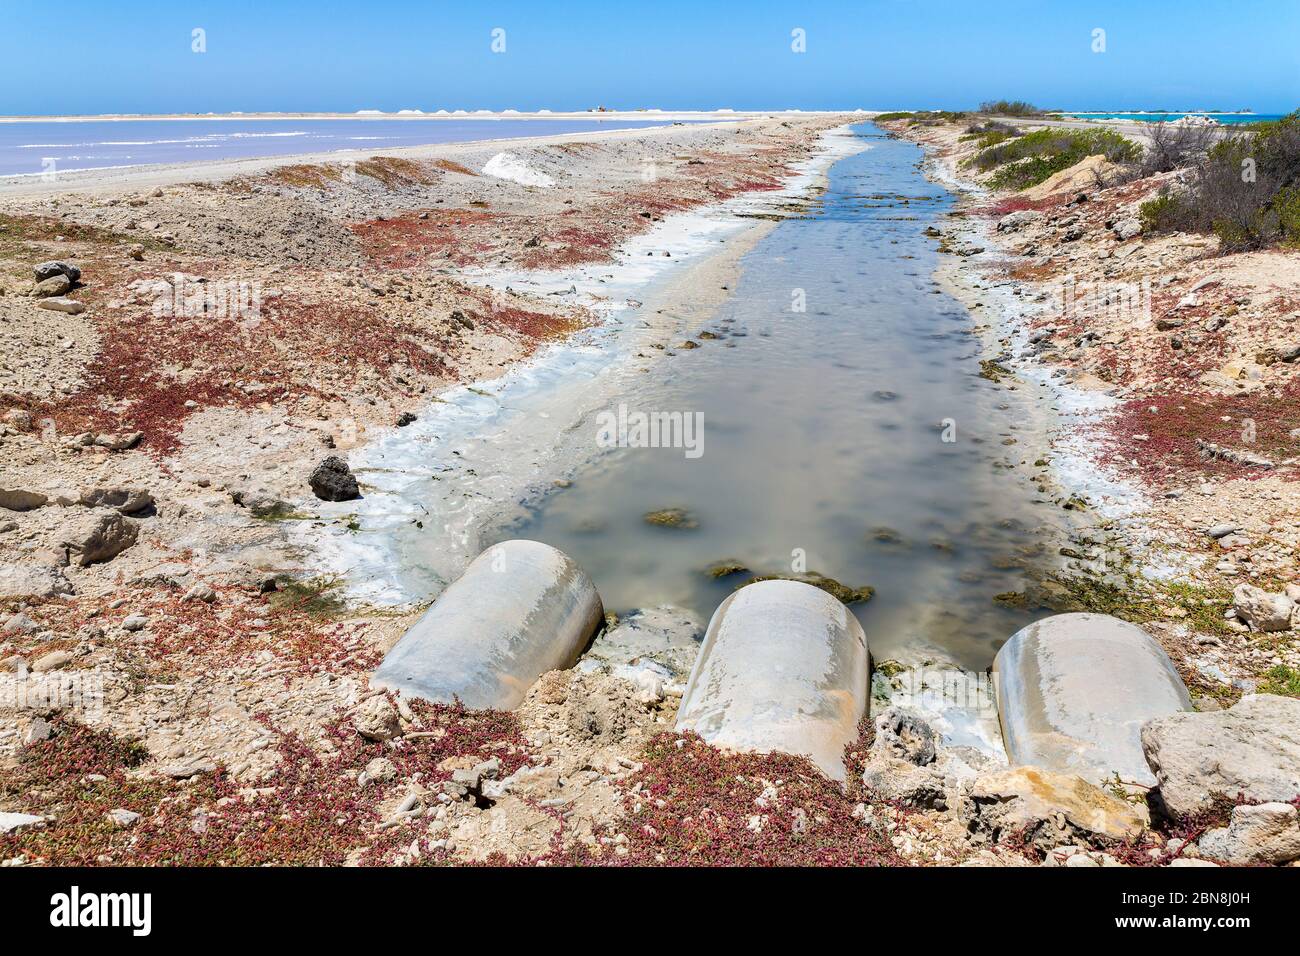 Drain pipes discharge waste water into a stream for salt industry on Bonaire Stock Photo